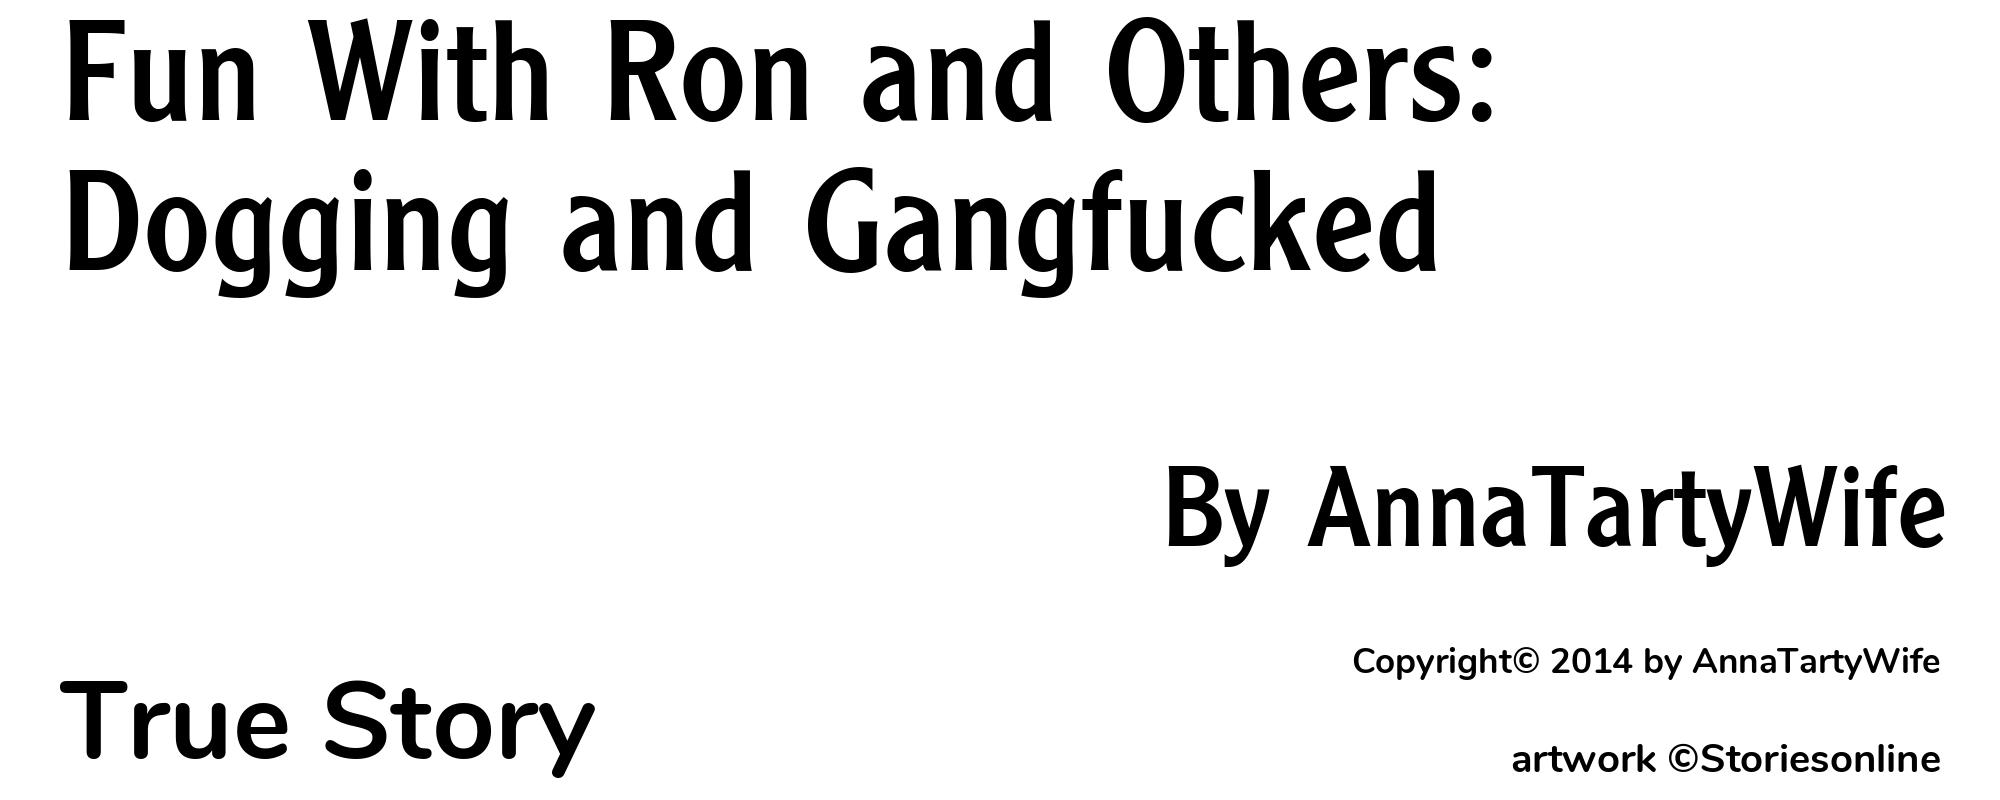 Fun With Ron and Others: Dogging and Gangfucked - Cover